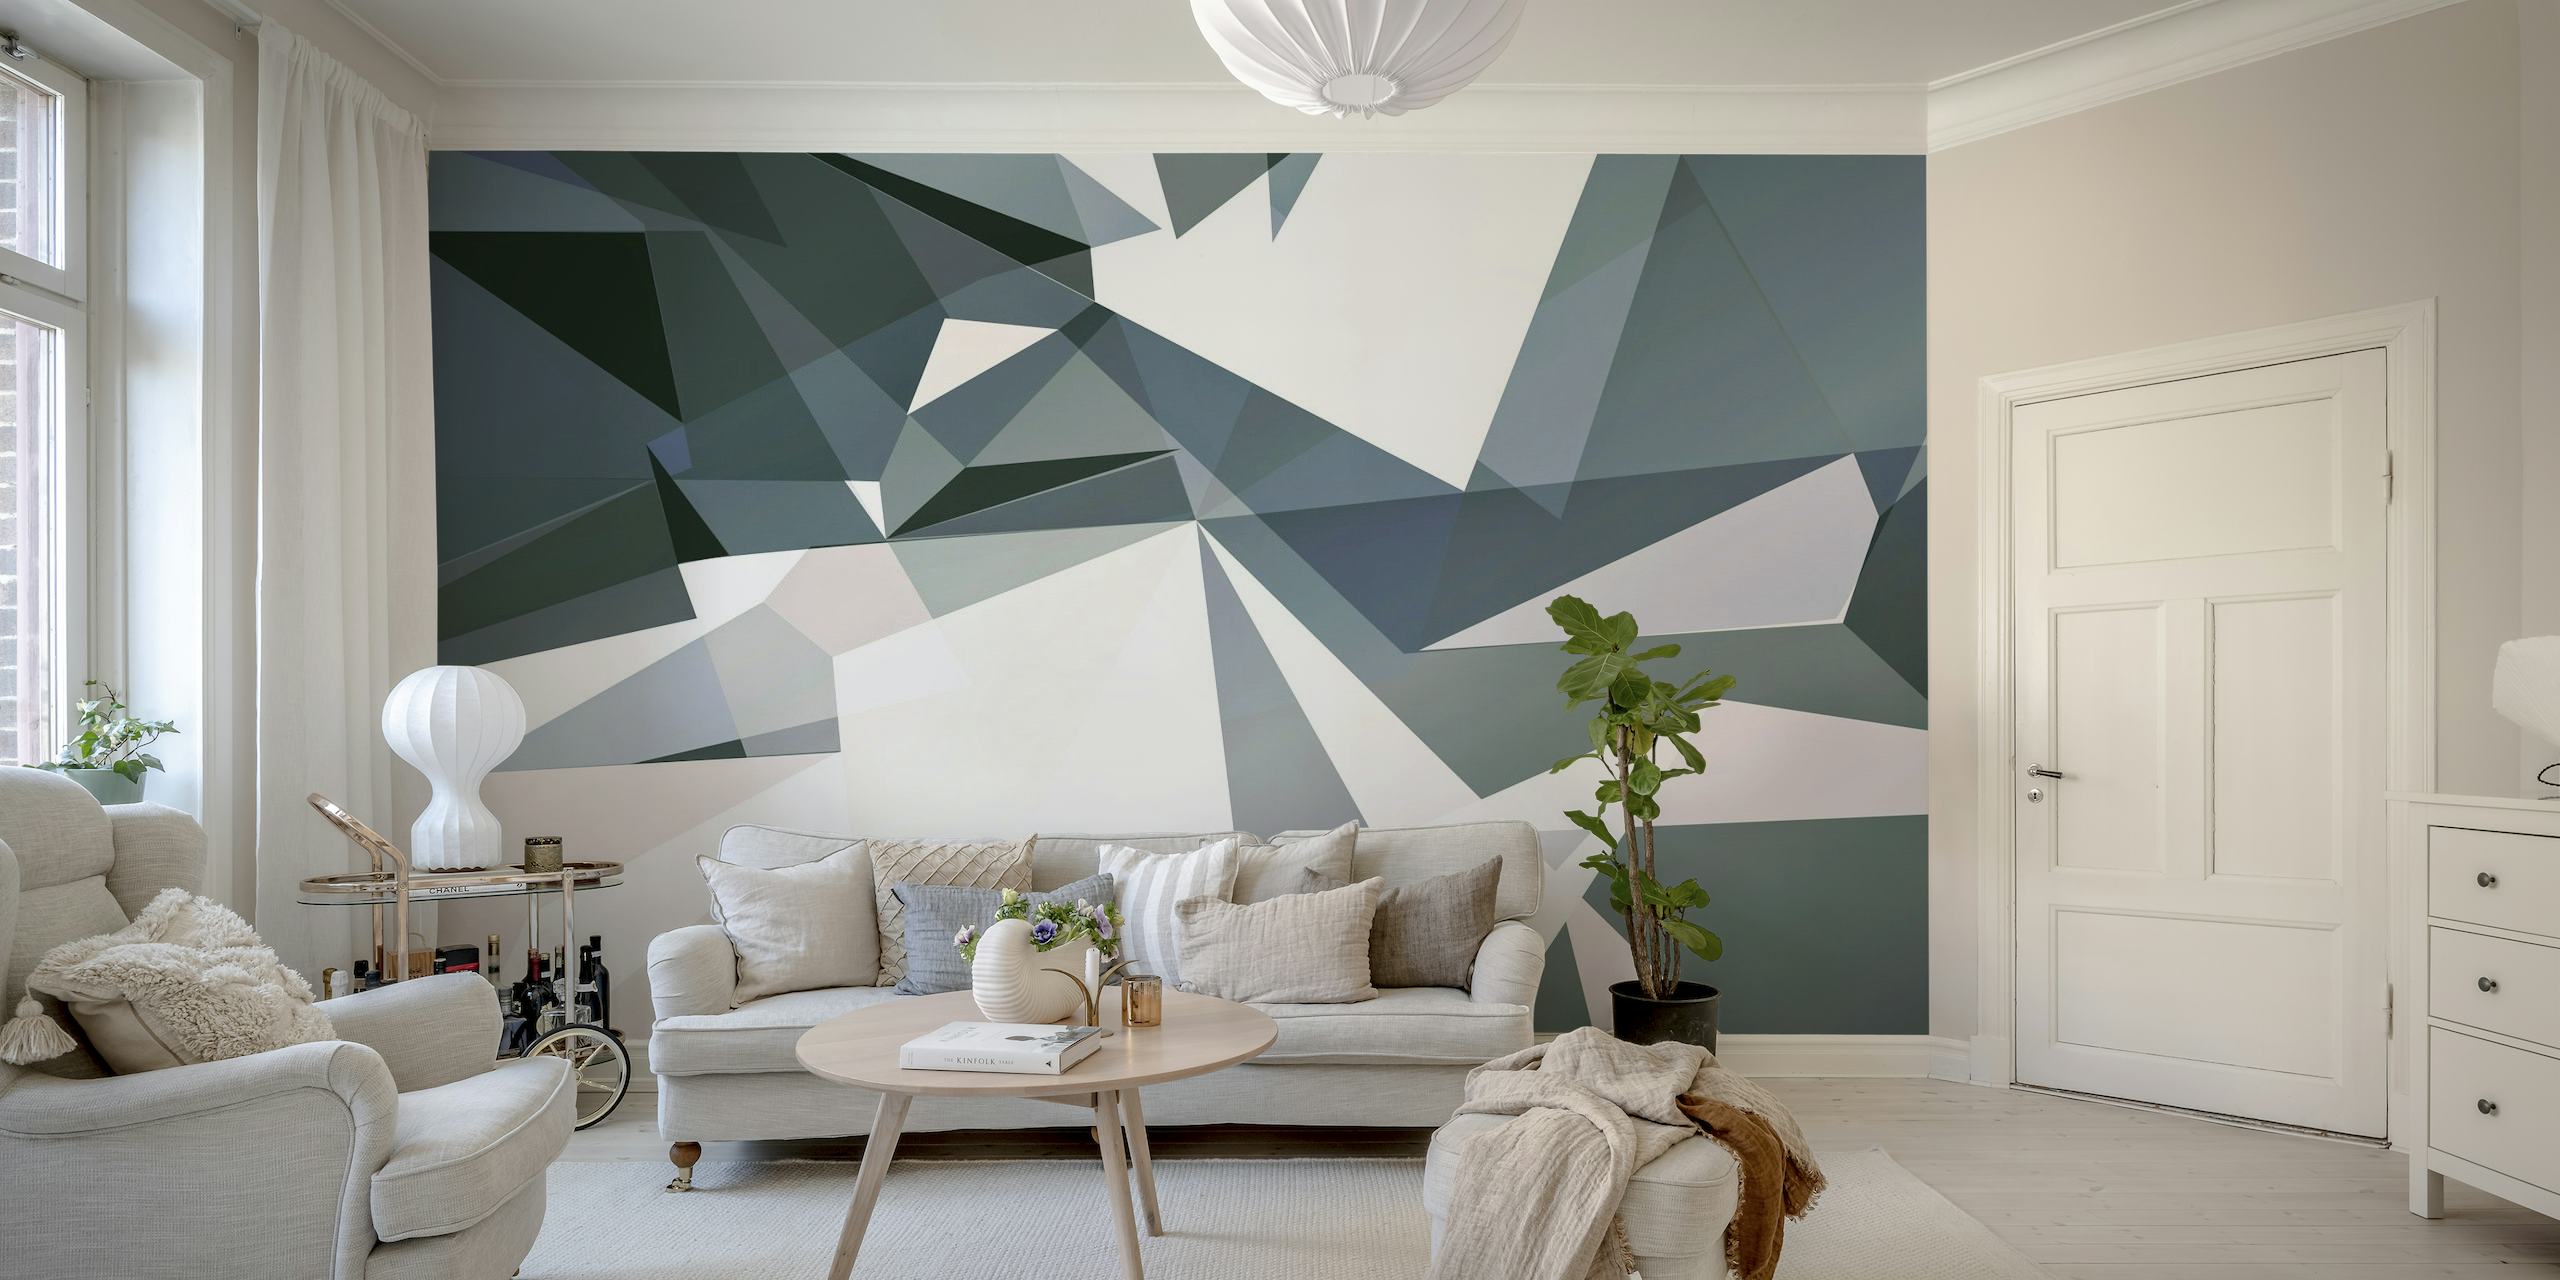 Vintage Triangles v4 wall mural with muted green and light gray geometric pattern